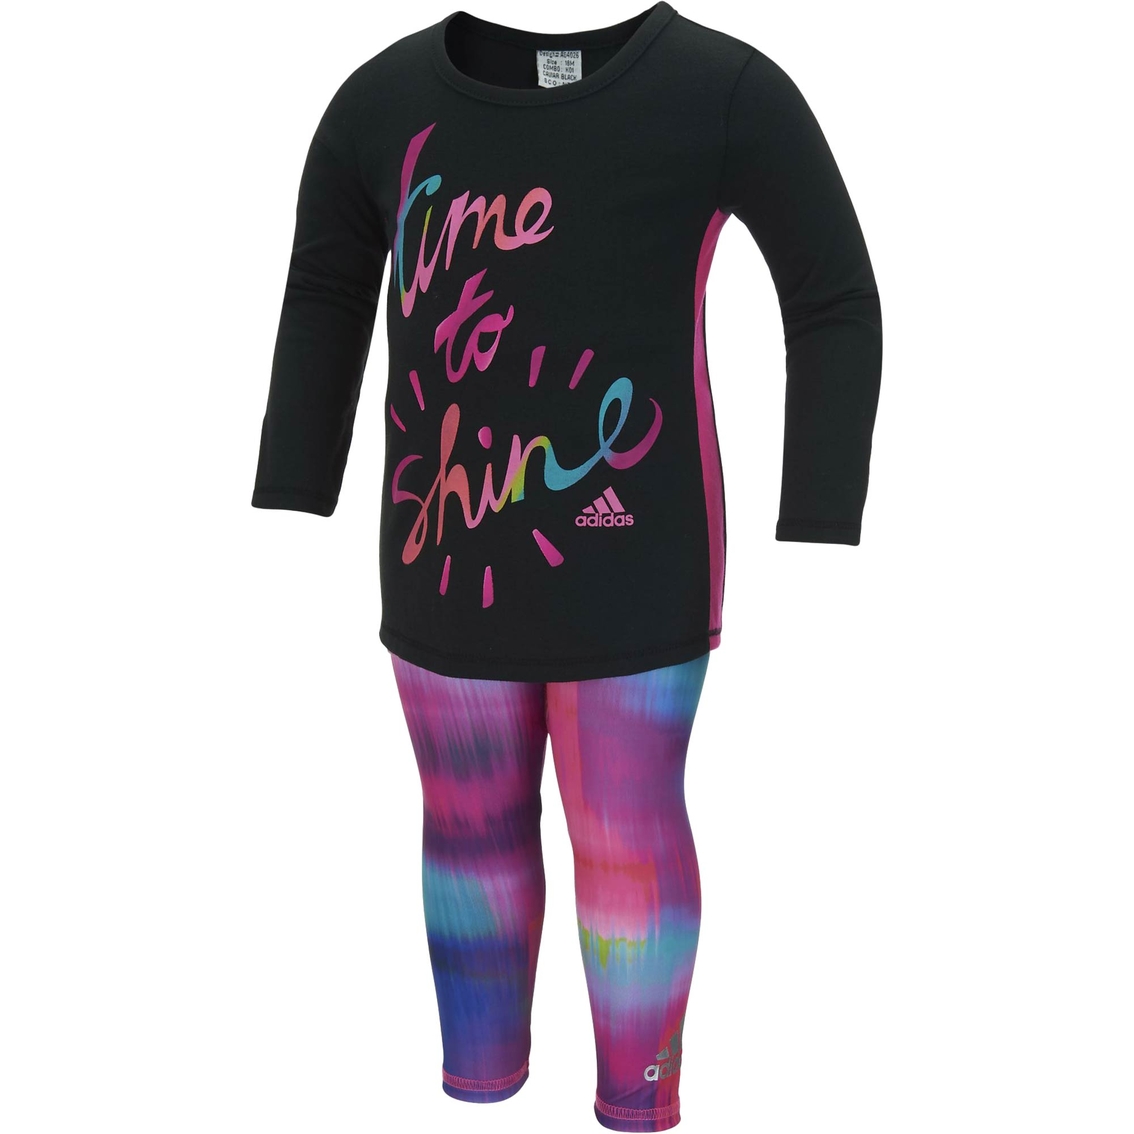 Buy > adidas tights and shirt set > in stock